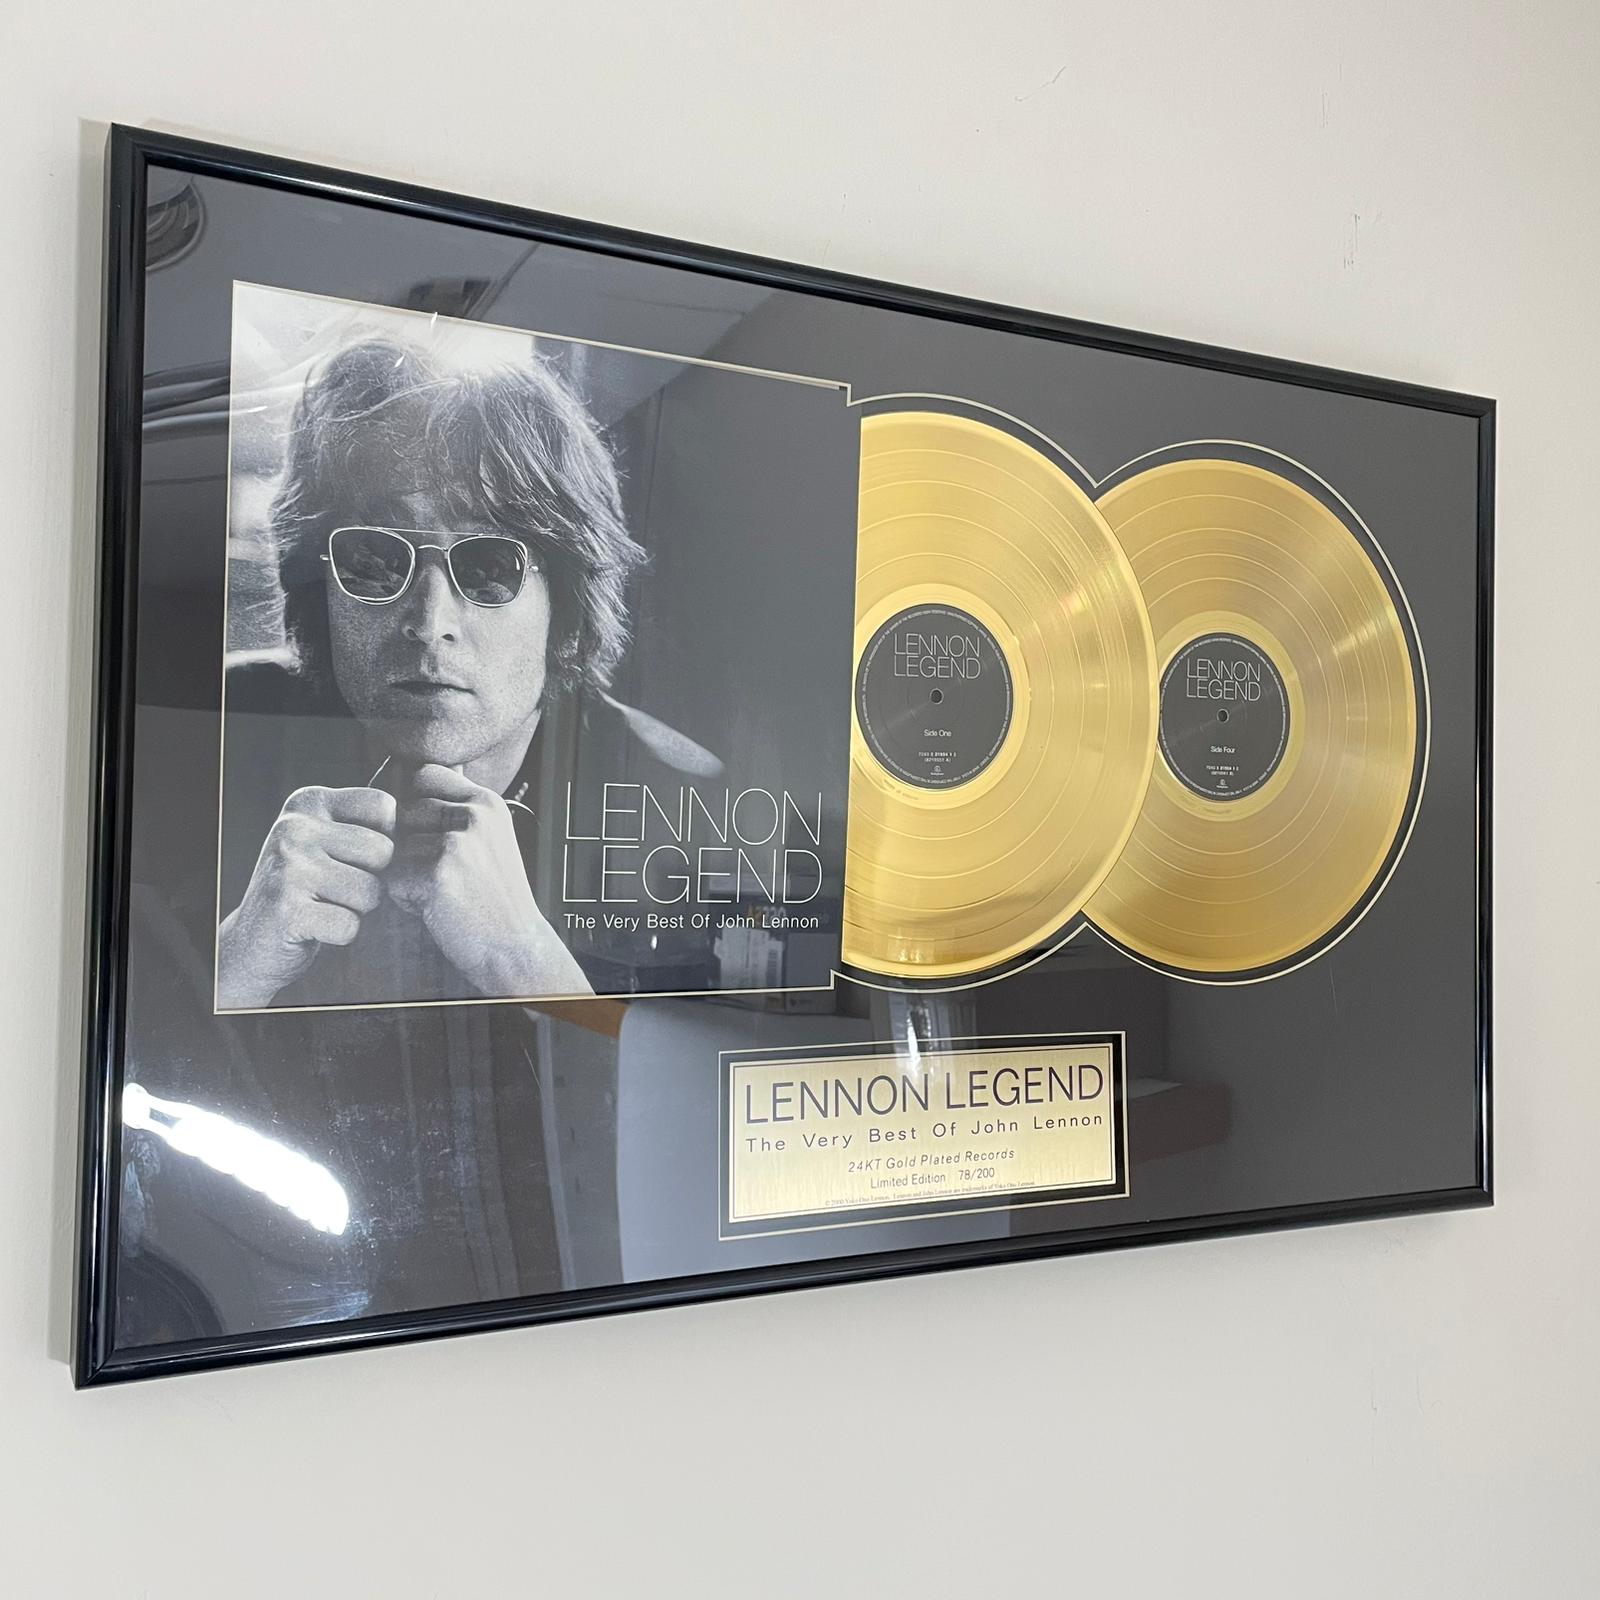 Certificate of limited edition - 24kt gold - limited edition of best of John Lennon